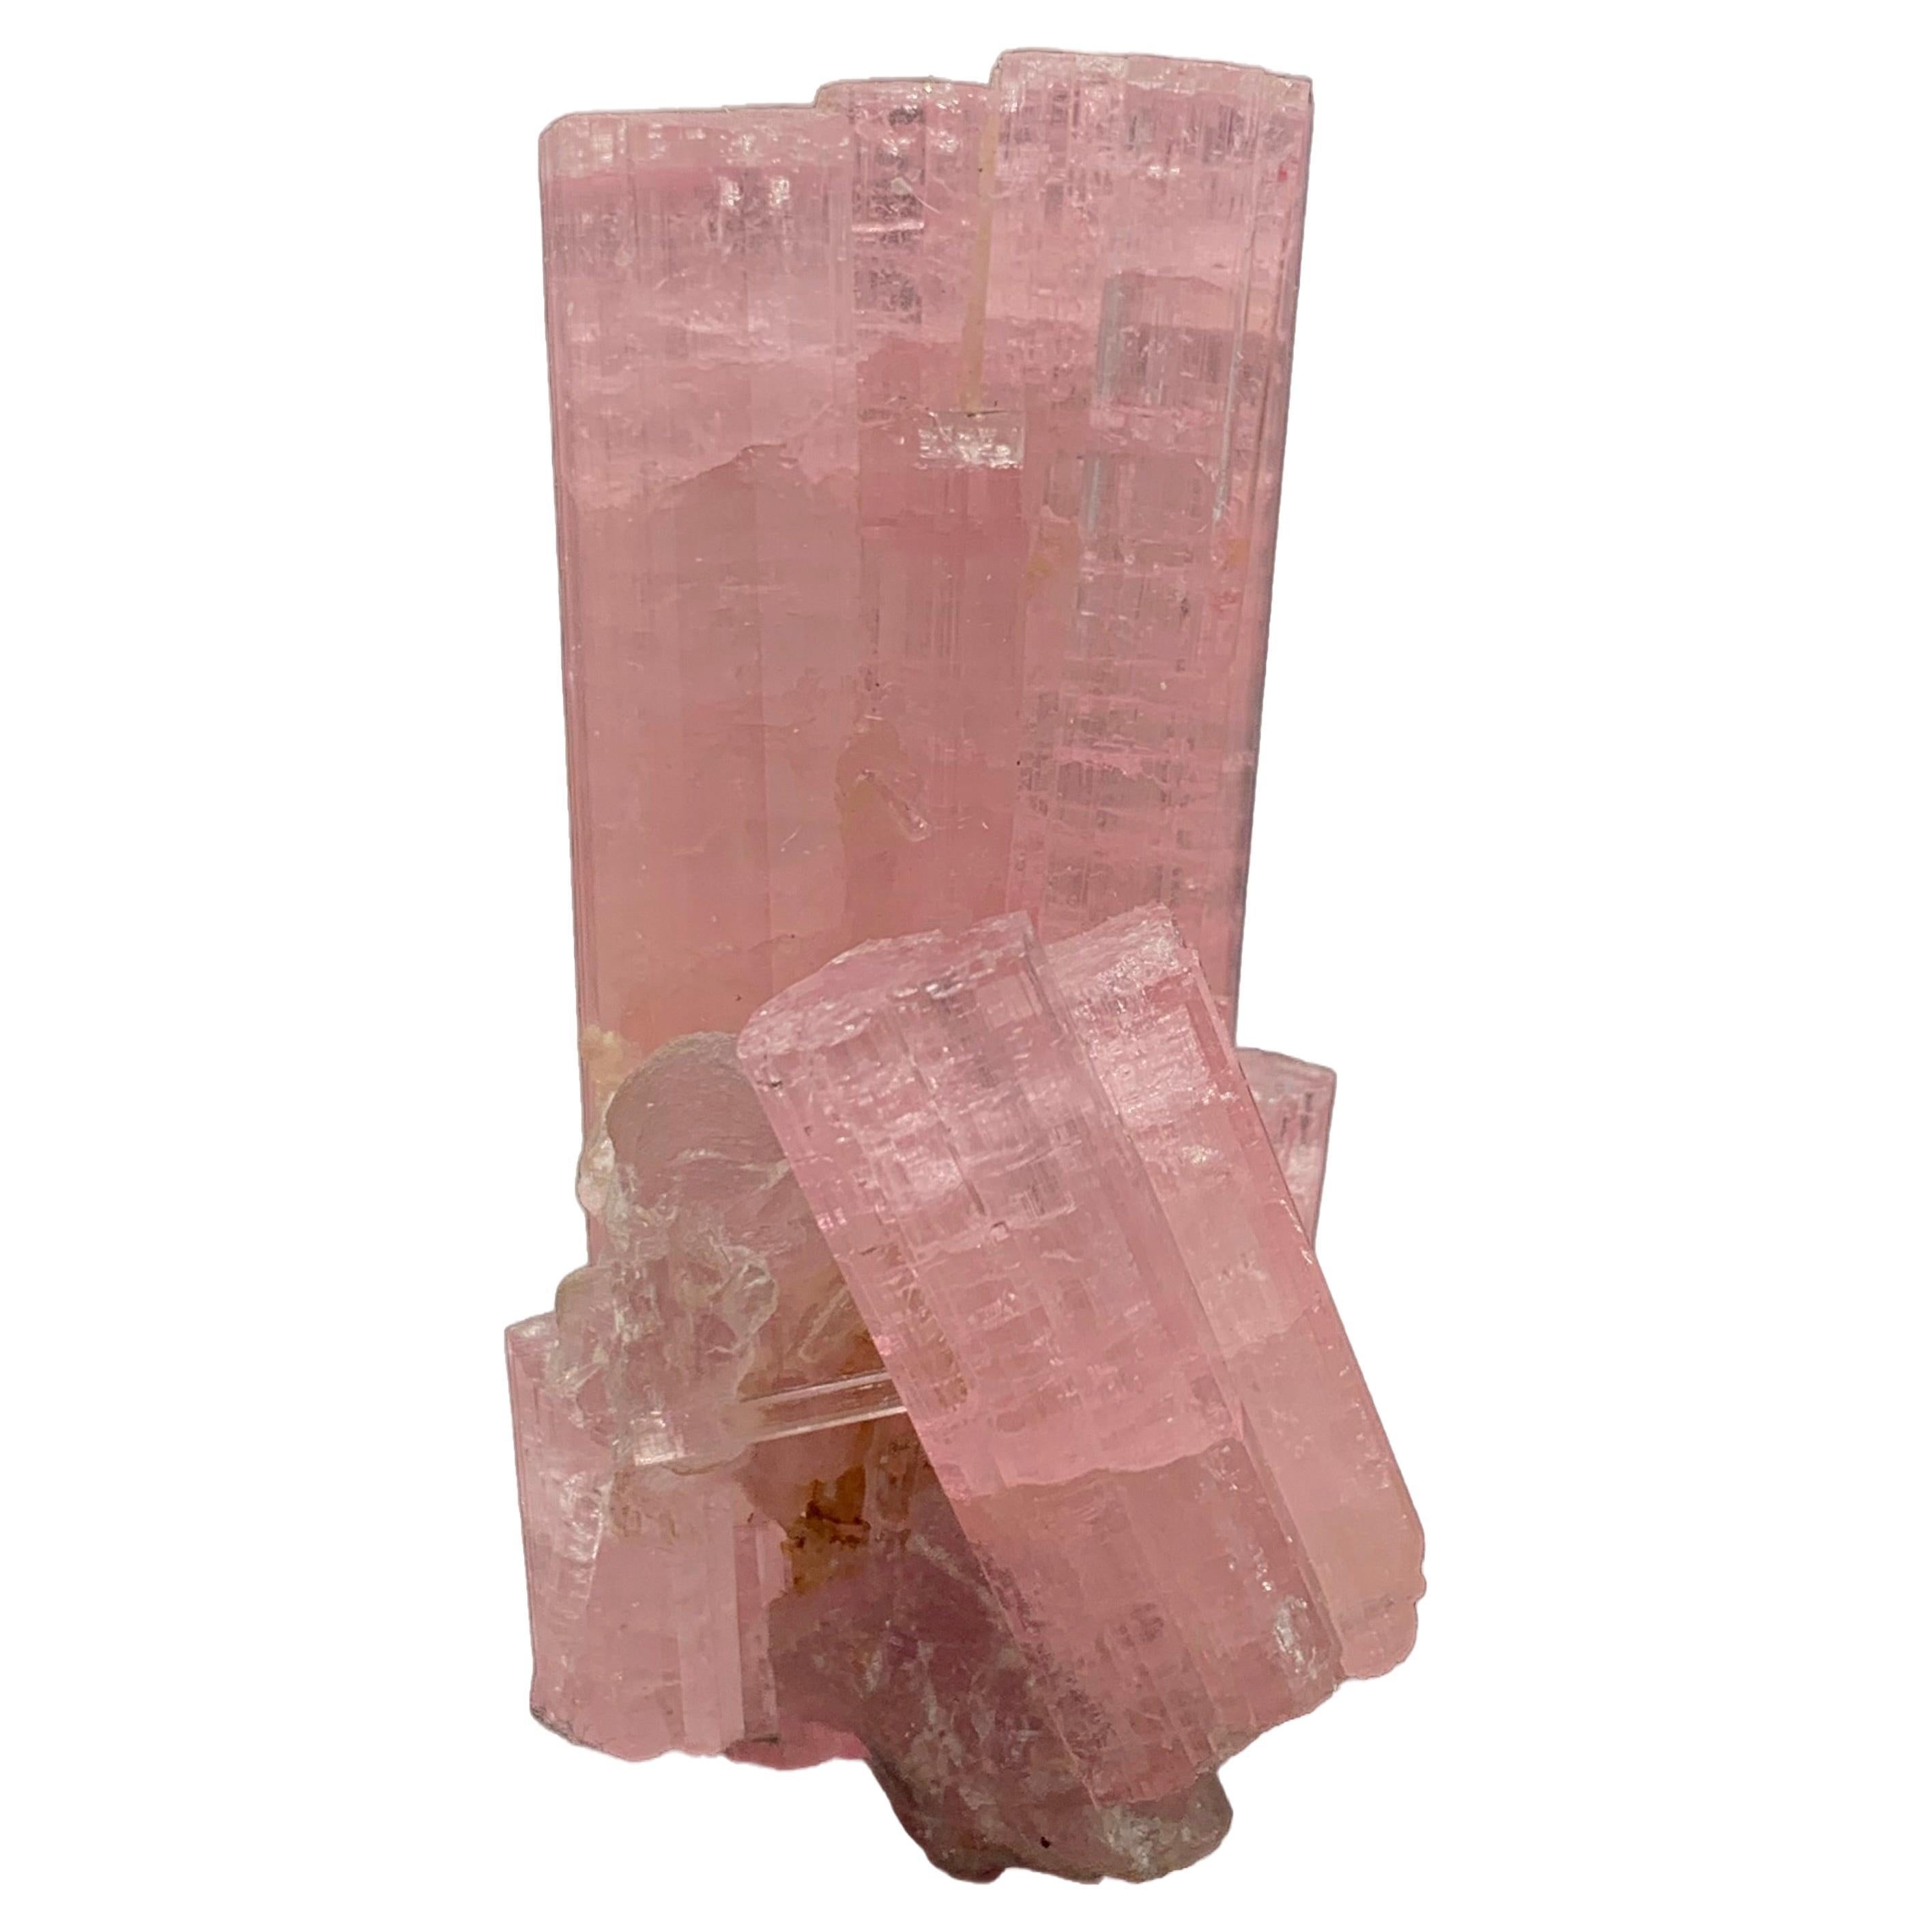 63.27 Gram Pretty Pink Tourmaline Crystal Bunch From Paprook Mine, Afghanistan  For Sale